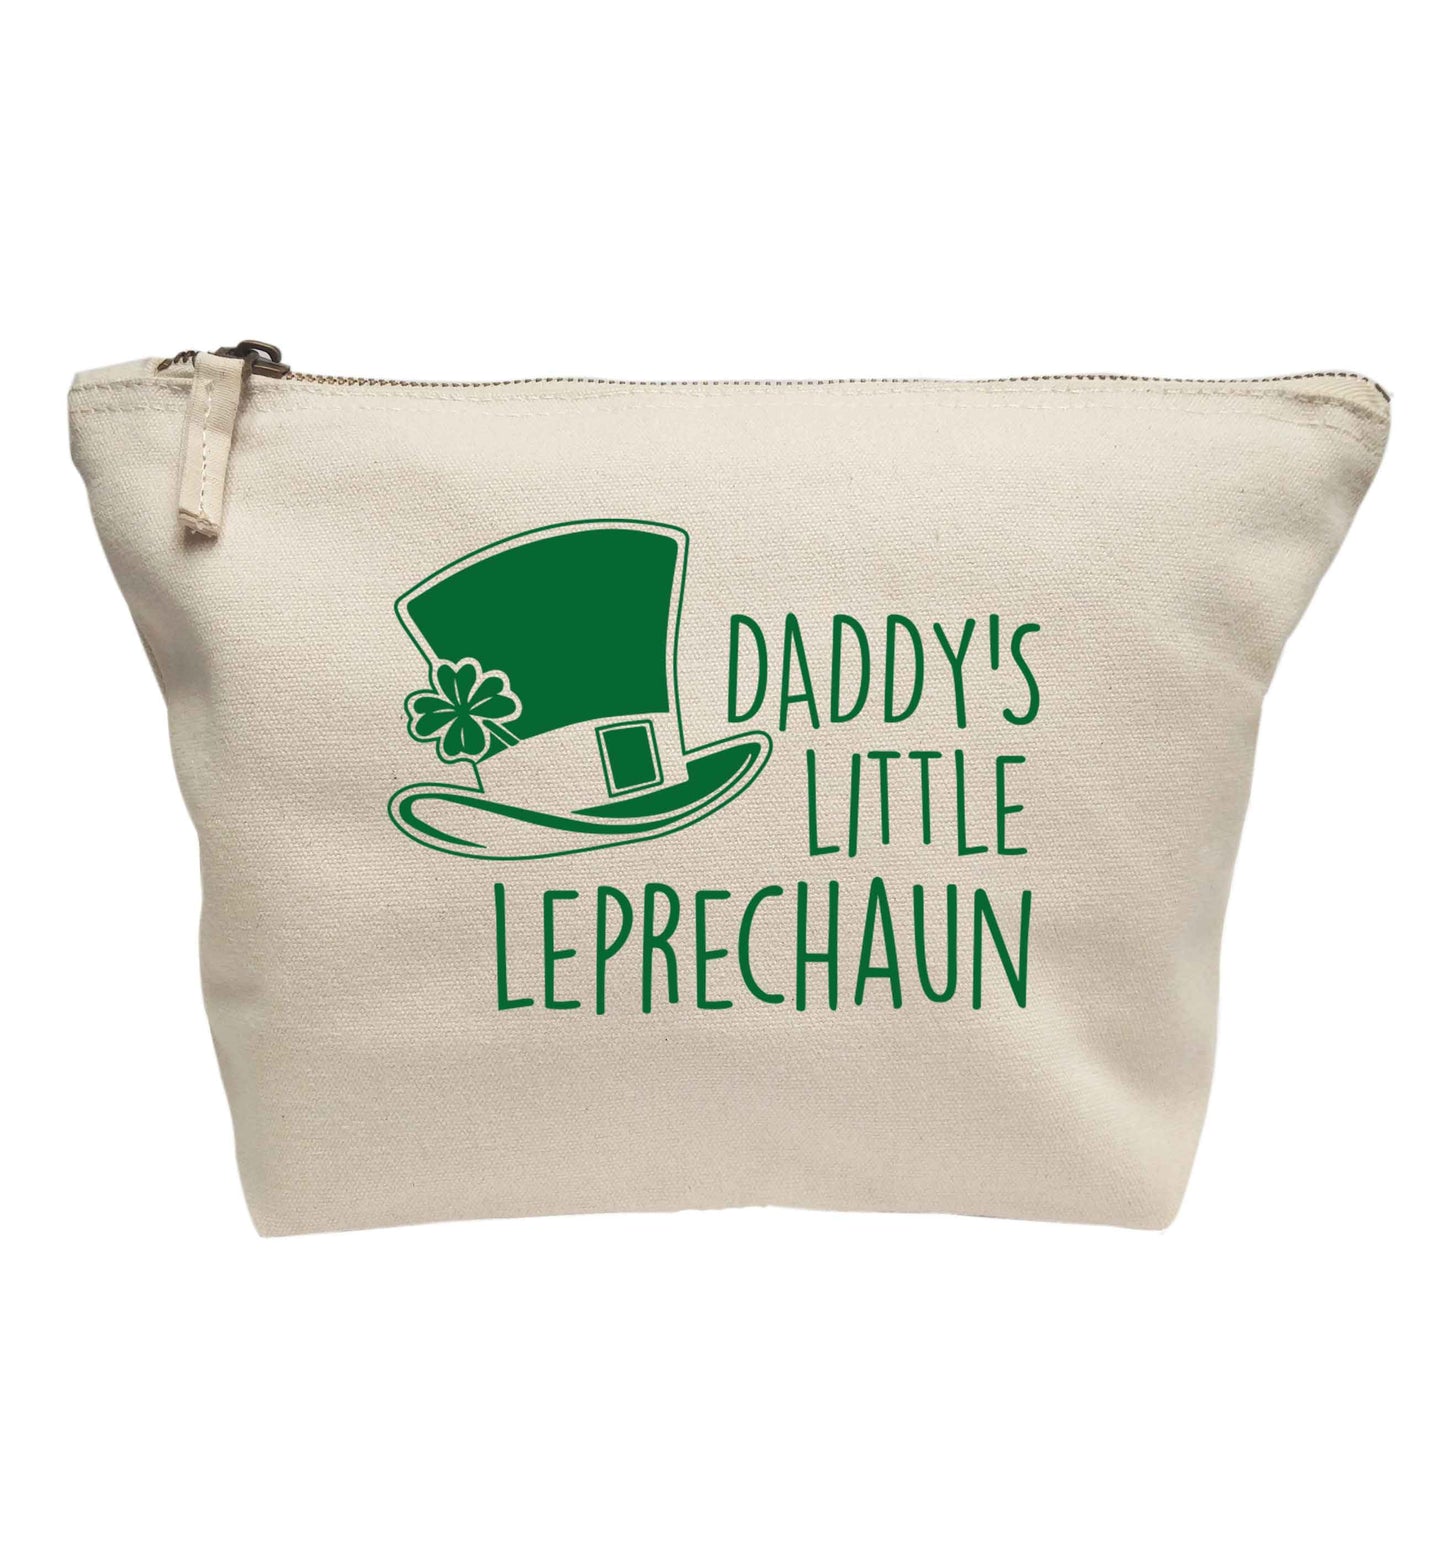 Daddy's lucky charm | Makeup / wash bag